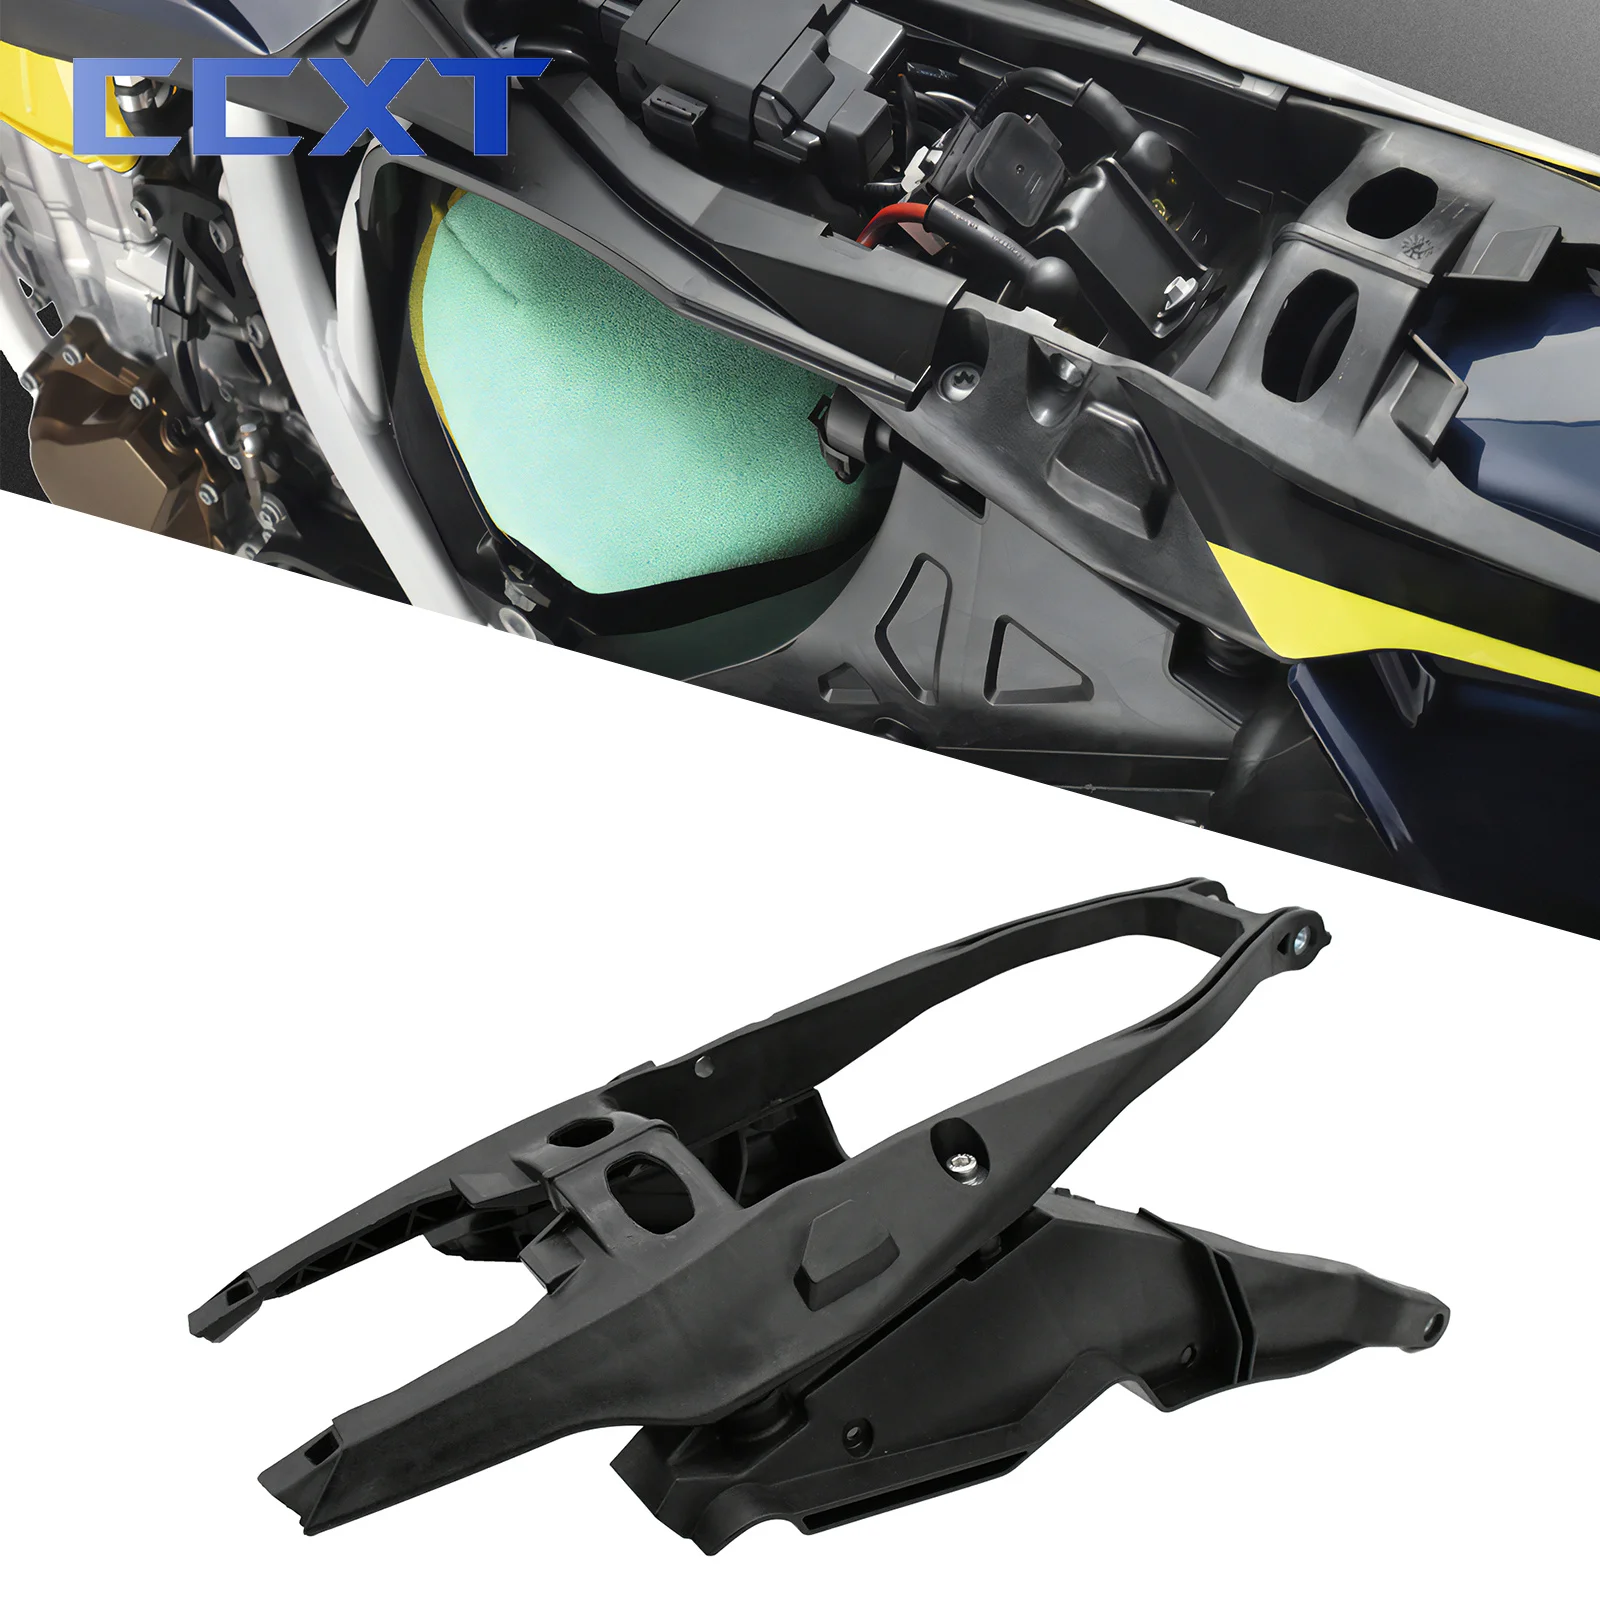 

Motorcycle Subframe Tailstock Support Tray Shelf Left Right Seat Frame For Husqvarna TC FC TE FE TX FX FS 2016 2017 2018 2019